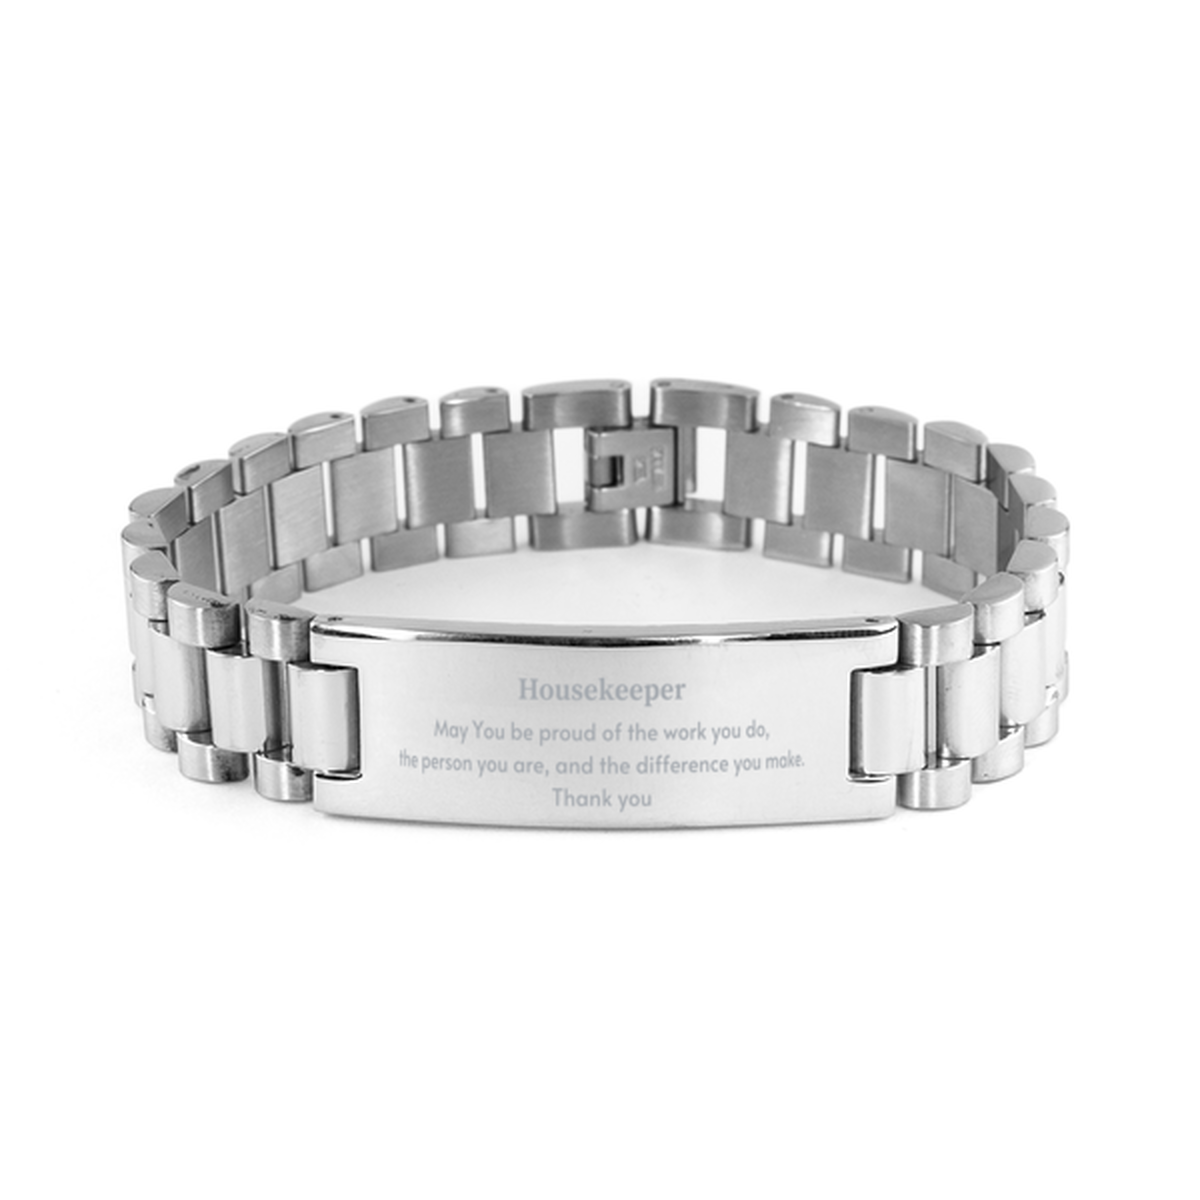 Heartwarming Ladder Stainless Steel Bracelet Retirement Coworkers Gifts for Housekeeper, Housekeeper May You be proud of the work you do, the person you are Gifts for Boss Men Women Friends